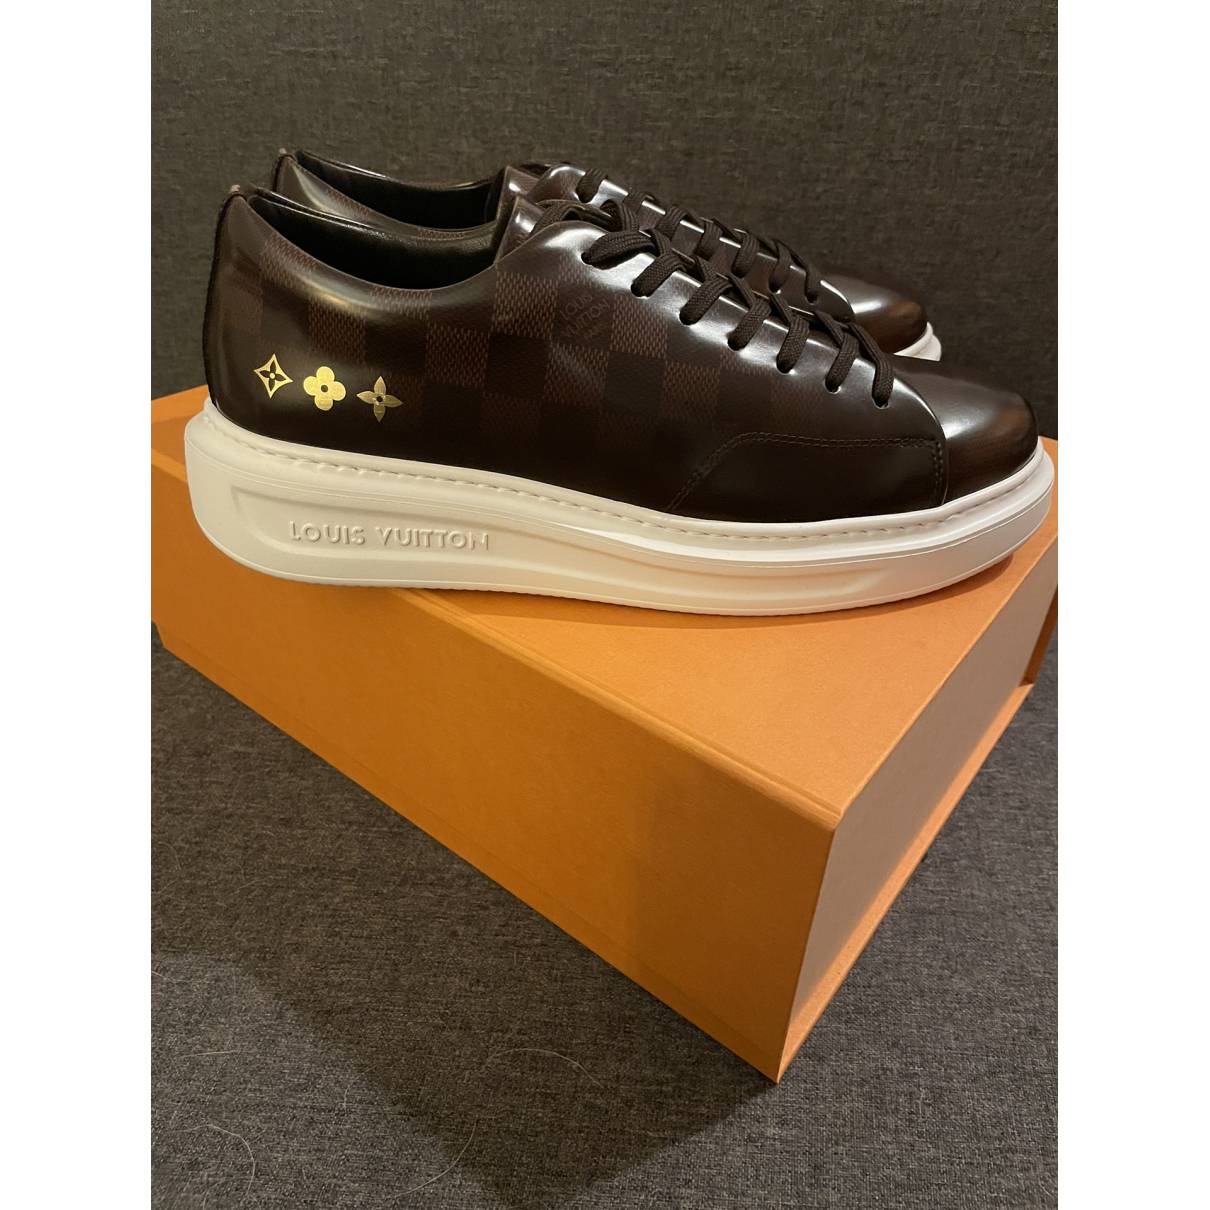 Beverly hills low trainers Louis Vuitton Brown size 40.5 EU in Other -  29323234